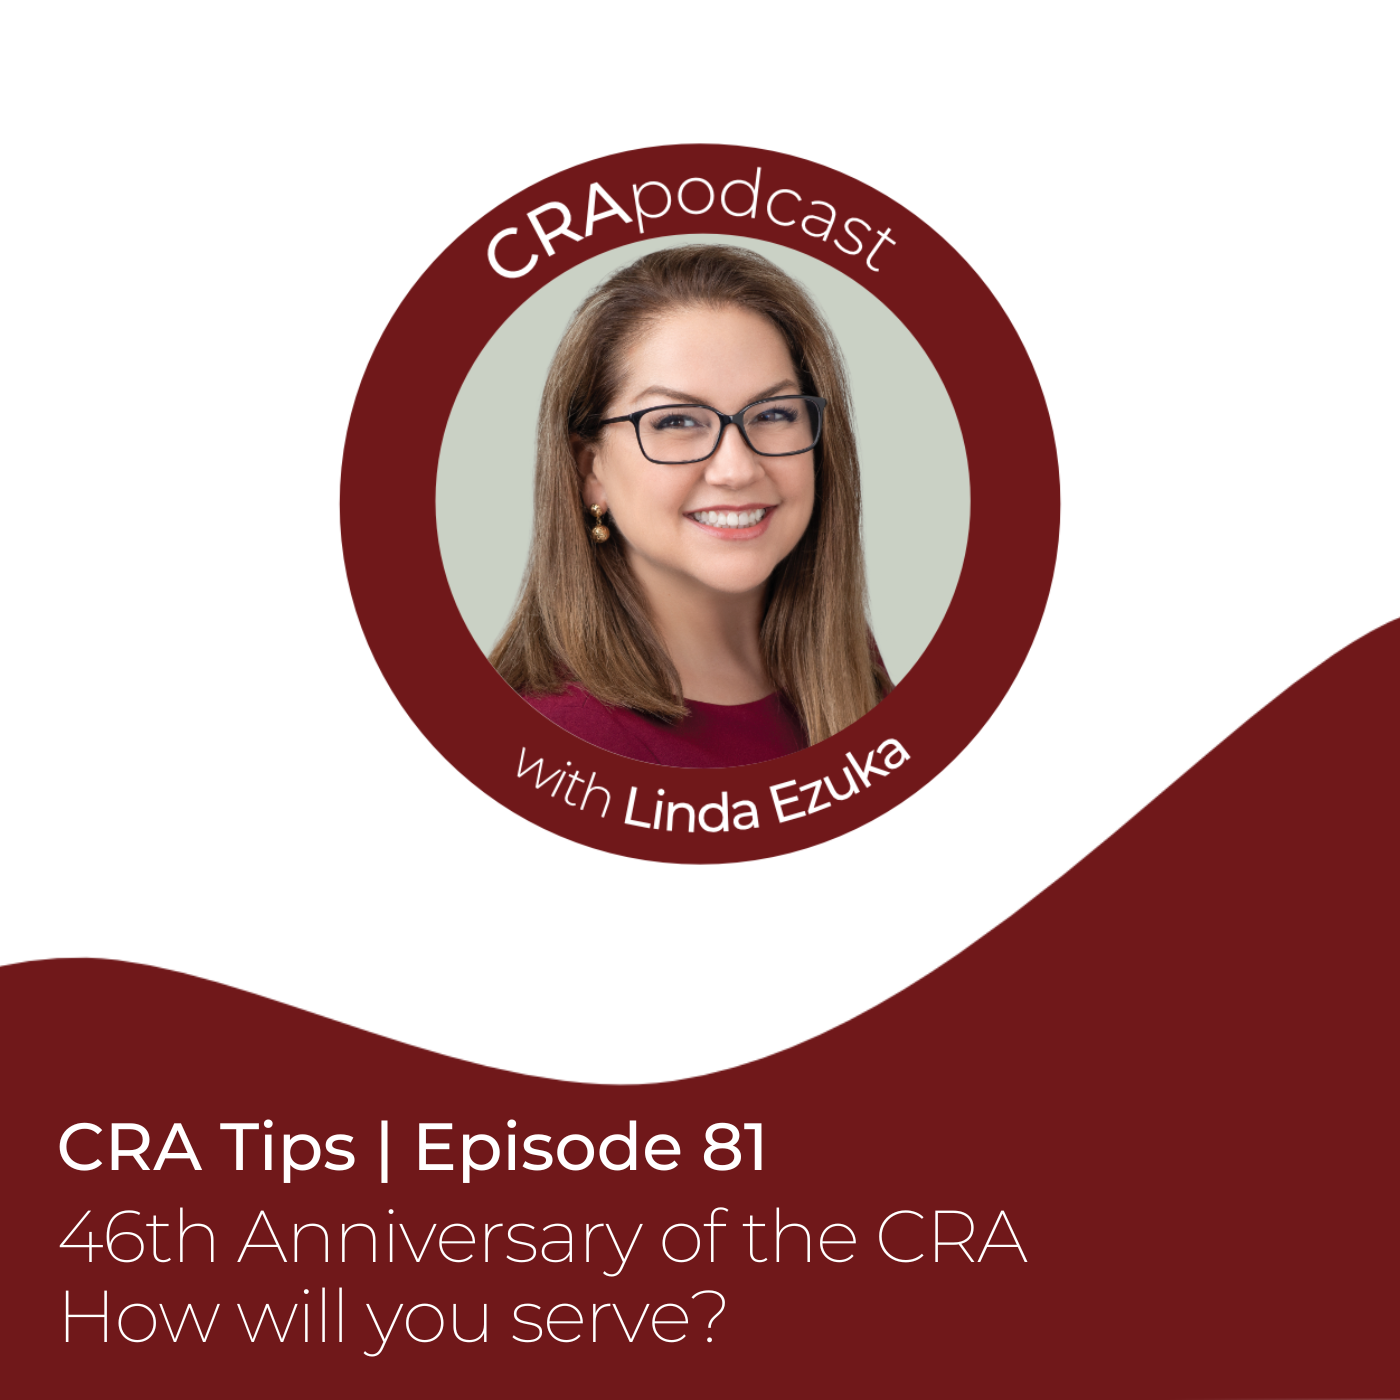 Episode 81: CRA Tips: 46th Anniversary of the CRA – How will you serve?